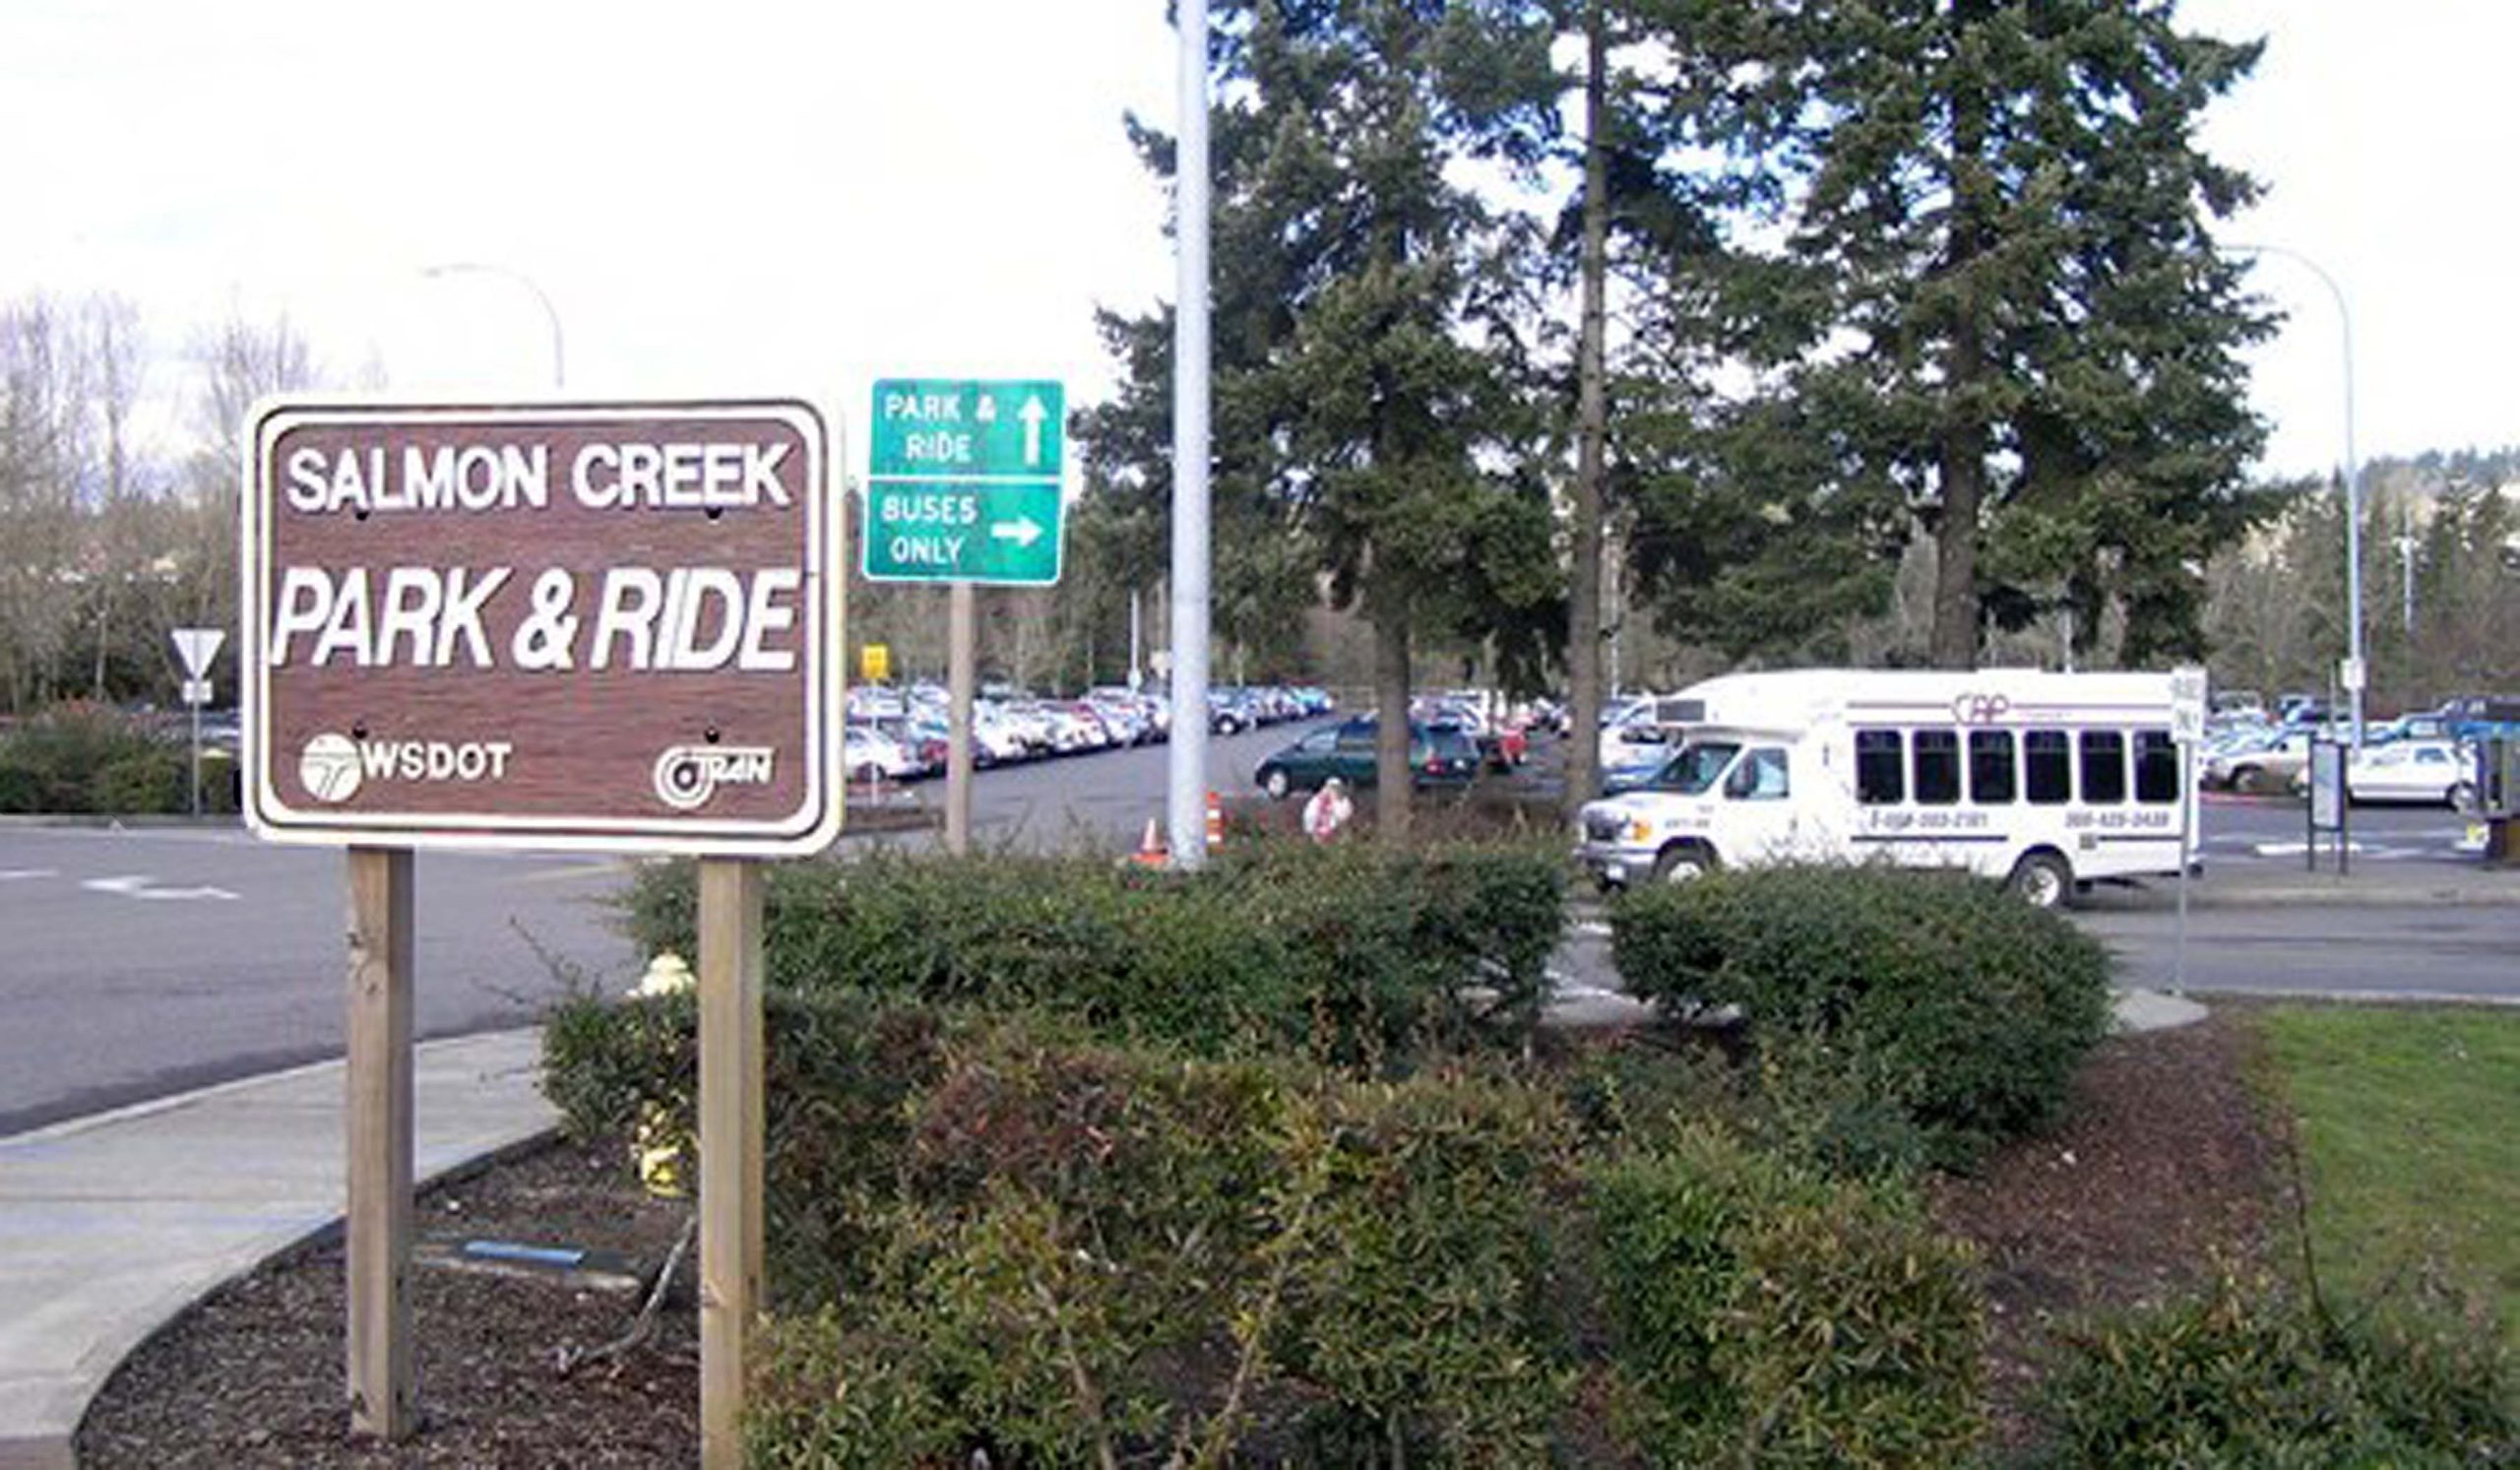 The Salmon Creek park and ride in Clark County, Washington